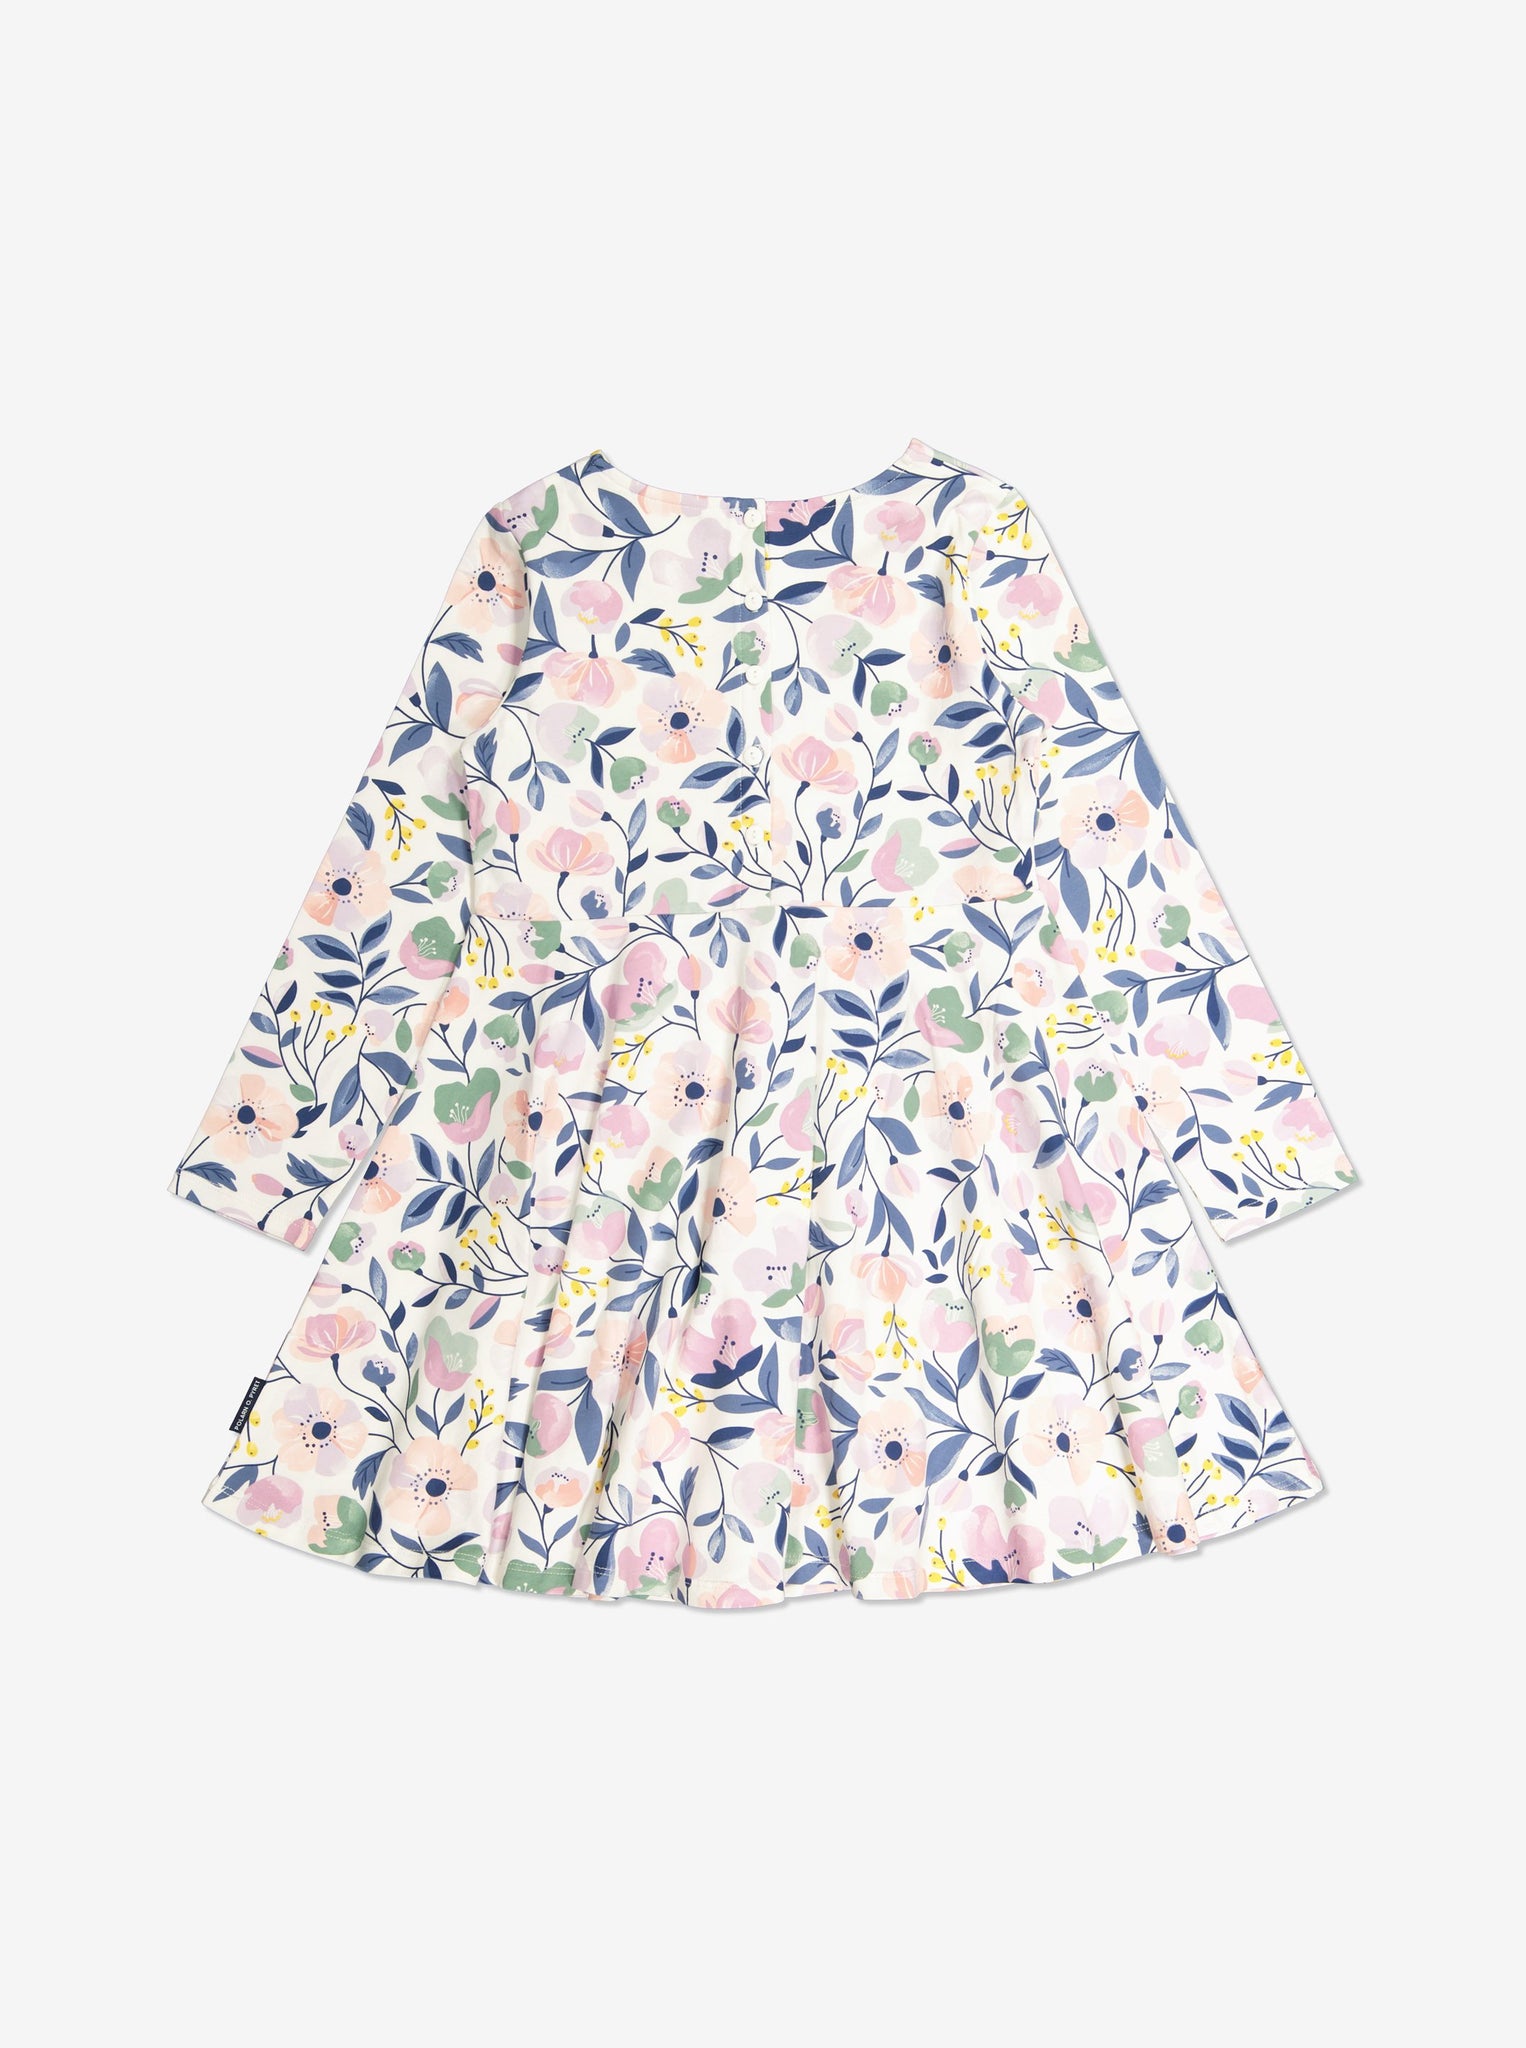  Organic White Floral Girls Dress from Polarn O. Pyret Kidswear. Made from sustainable materials.